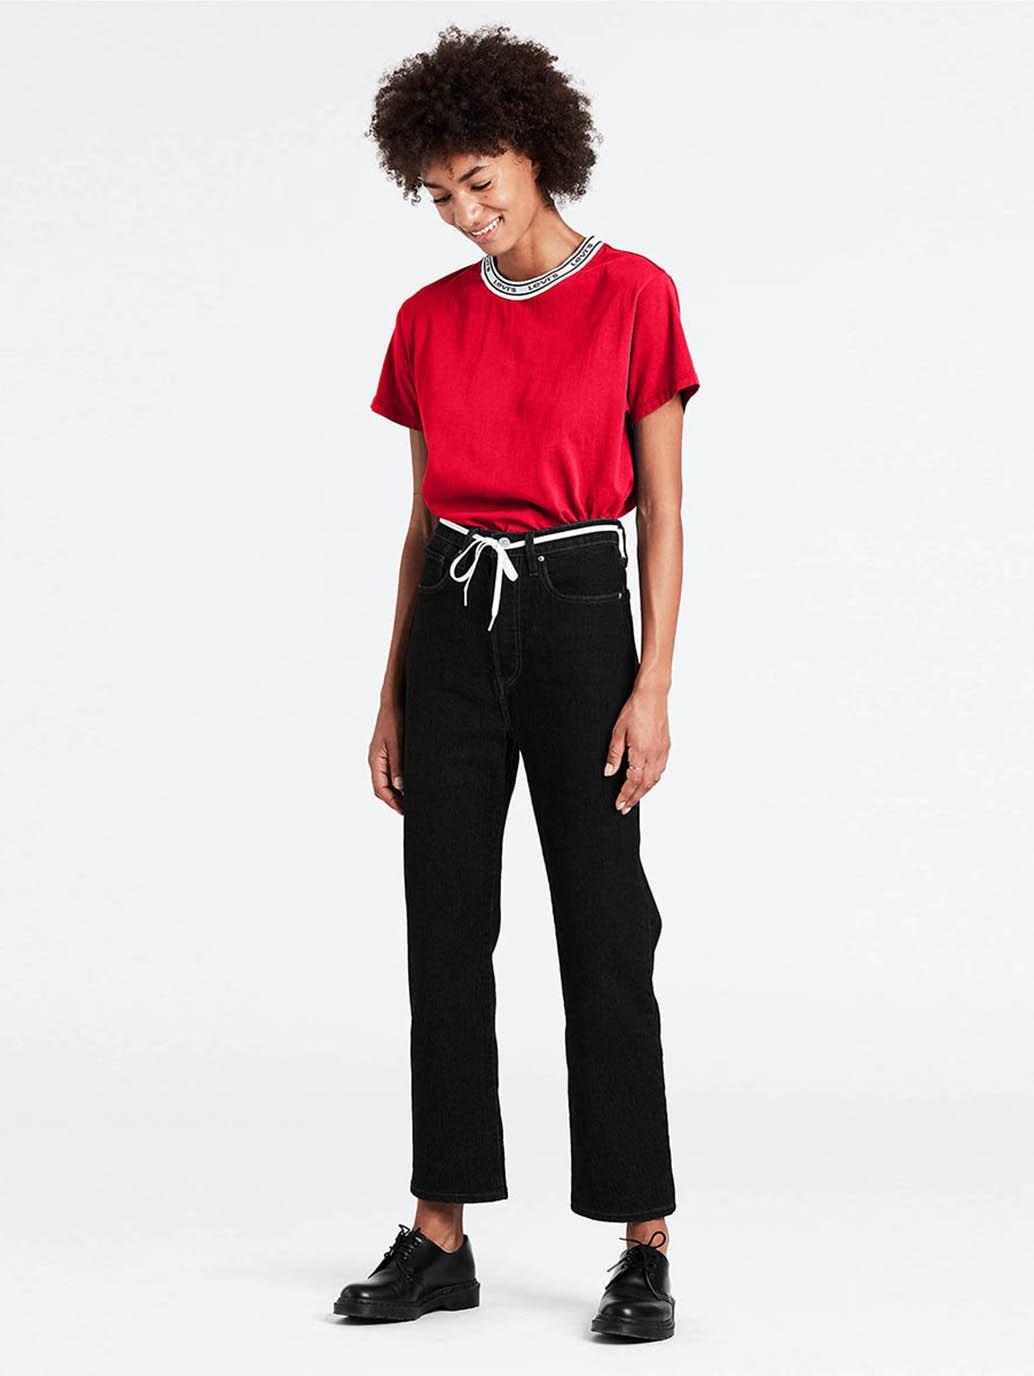 Buy Levi's® Women's Ribcage Straight Ankle Jeans | Levi's® Official Online  Store PH